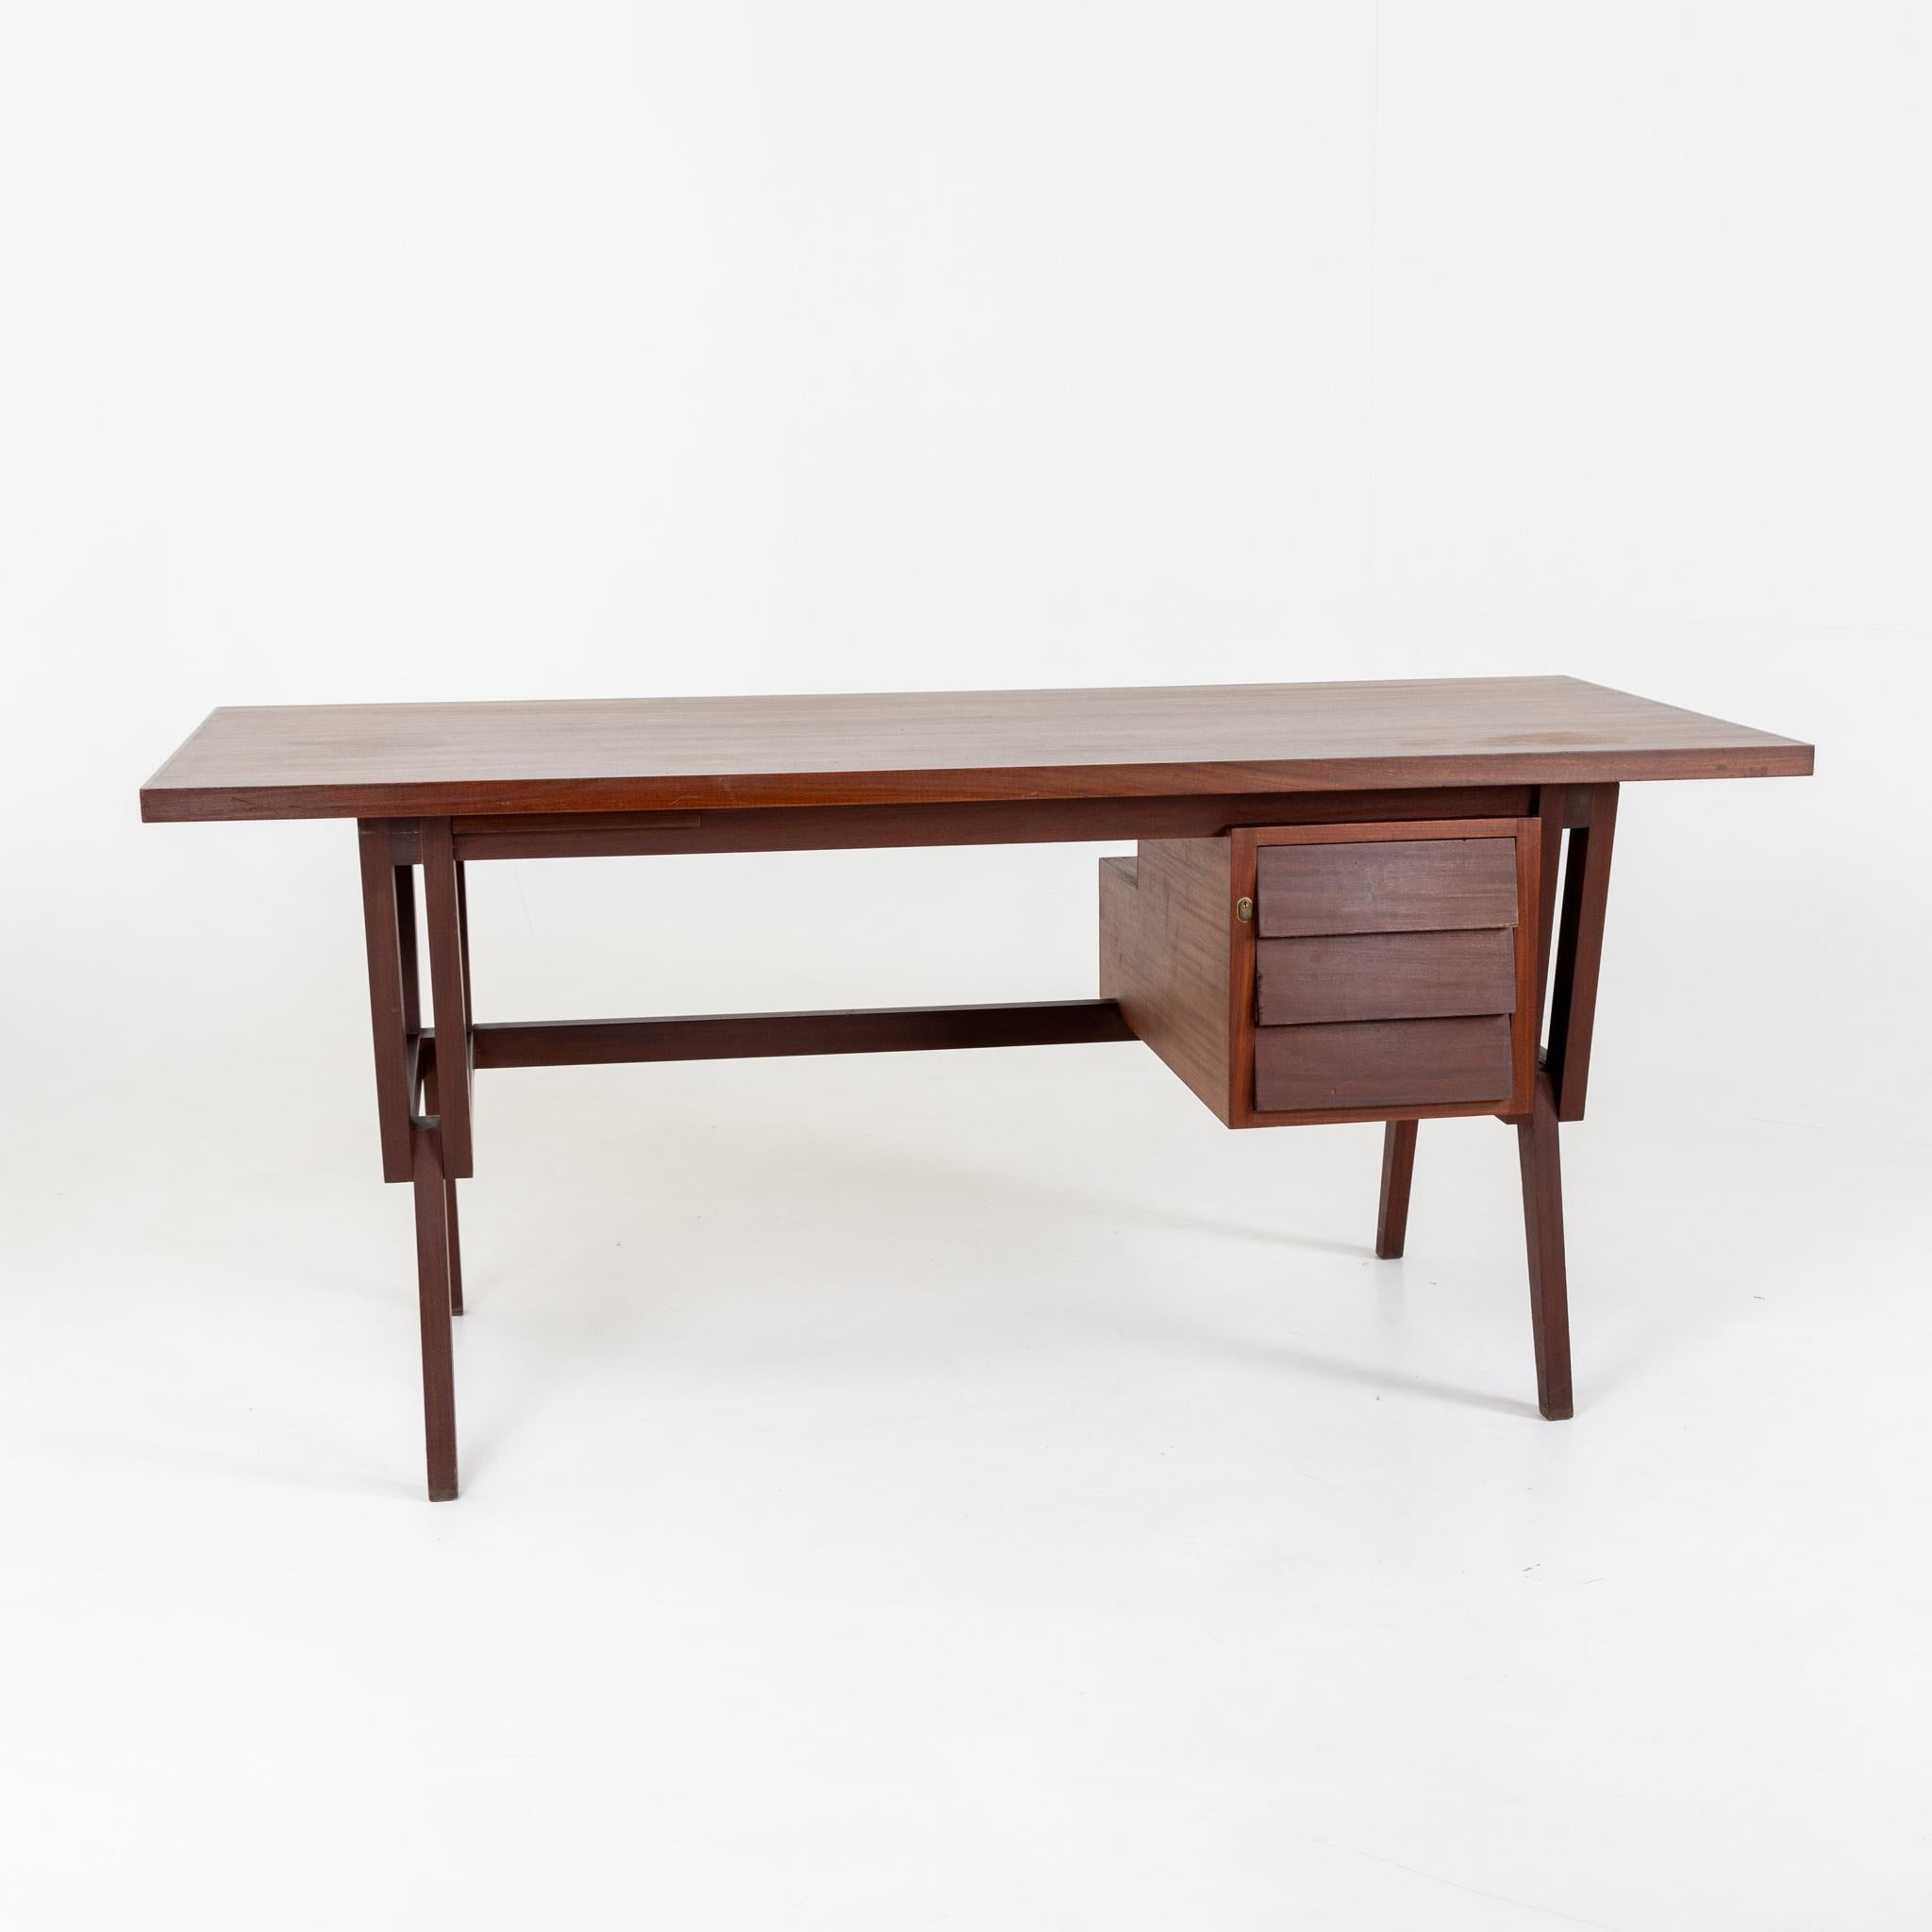 Italian desk in the style of Ico Parisi with unusually designed base and side drawer element. The back offers a storage compartment. Unrestored original condition.